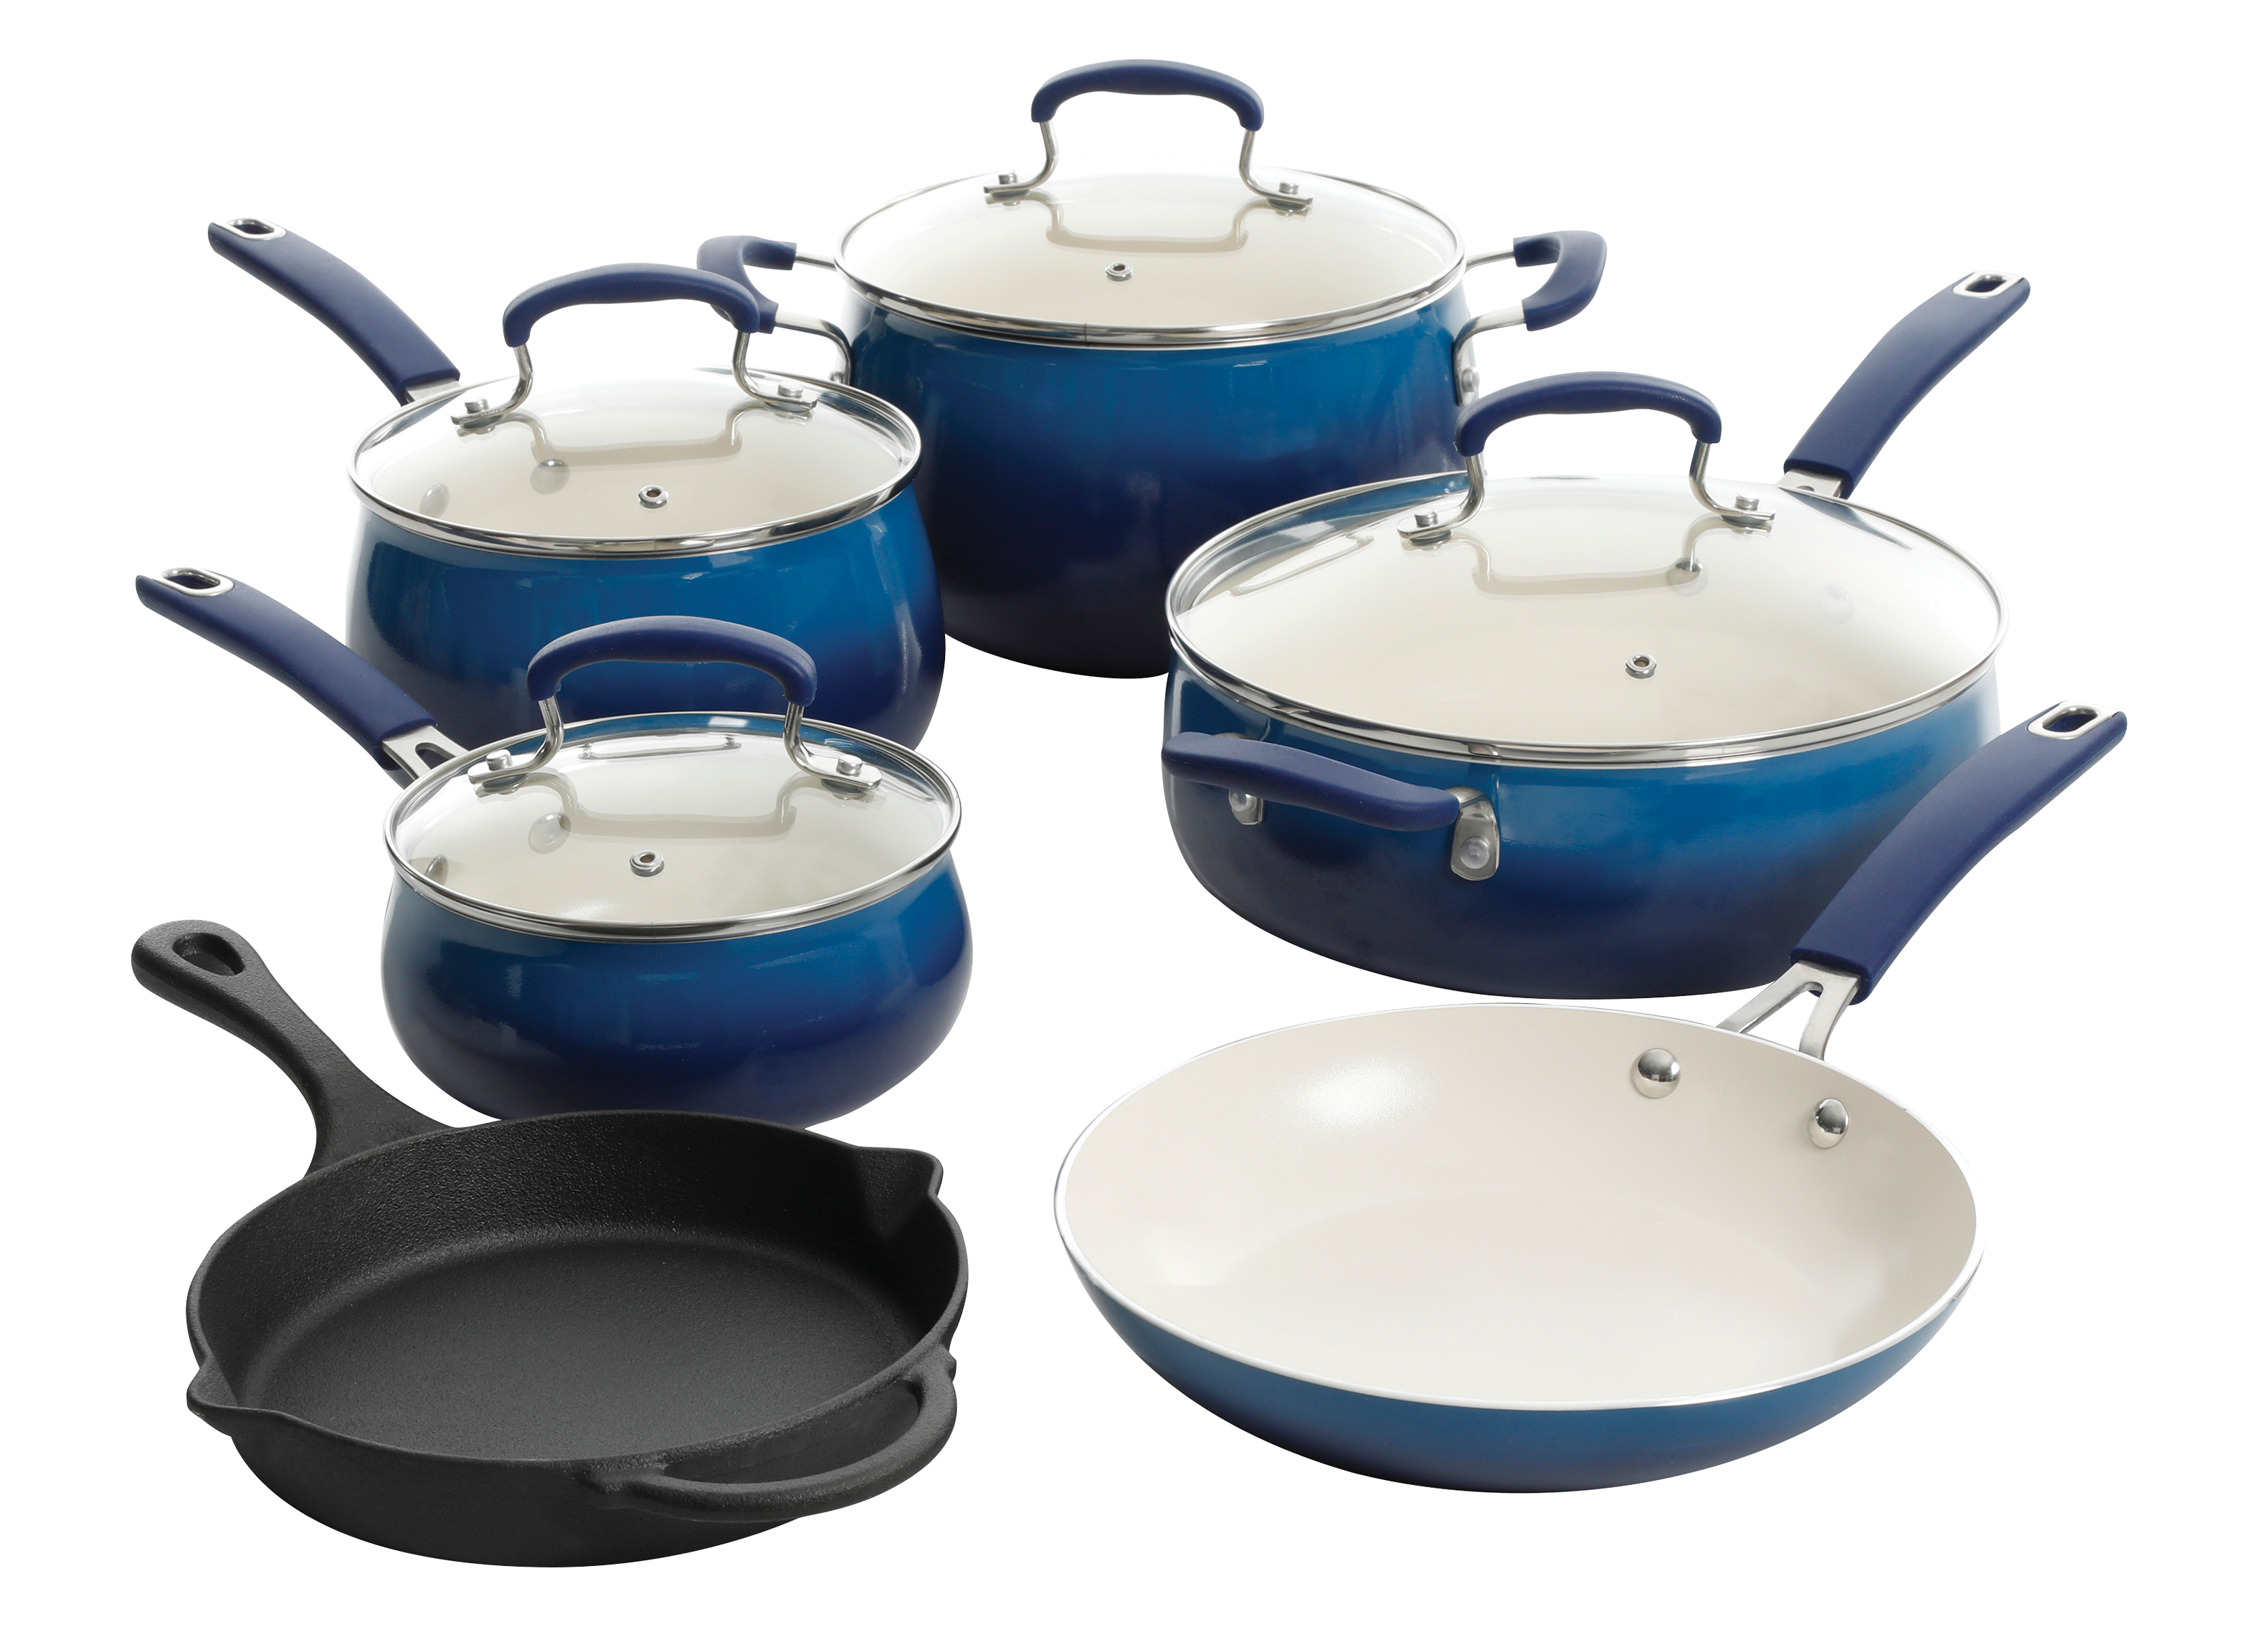 https://crdms.images.consumerreports.org/prod/products/cr/models/399707-cookware-sets-nonstick-pioneer-woman-classic-belly-ceramic-10008318.png